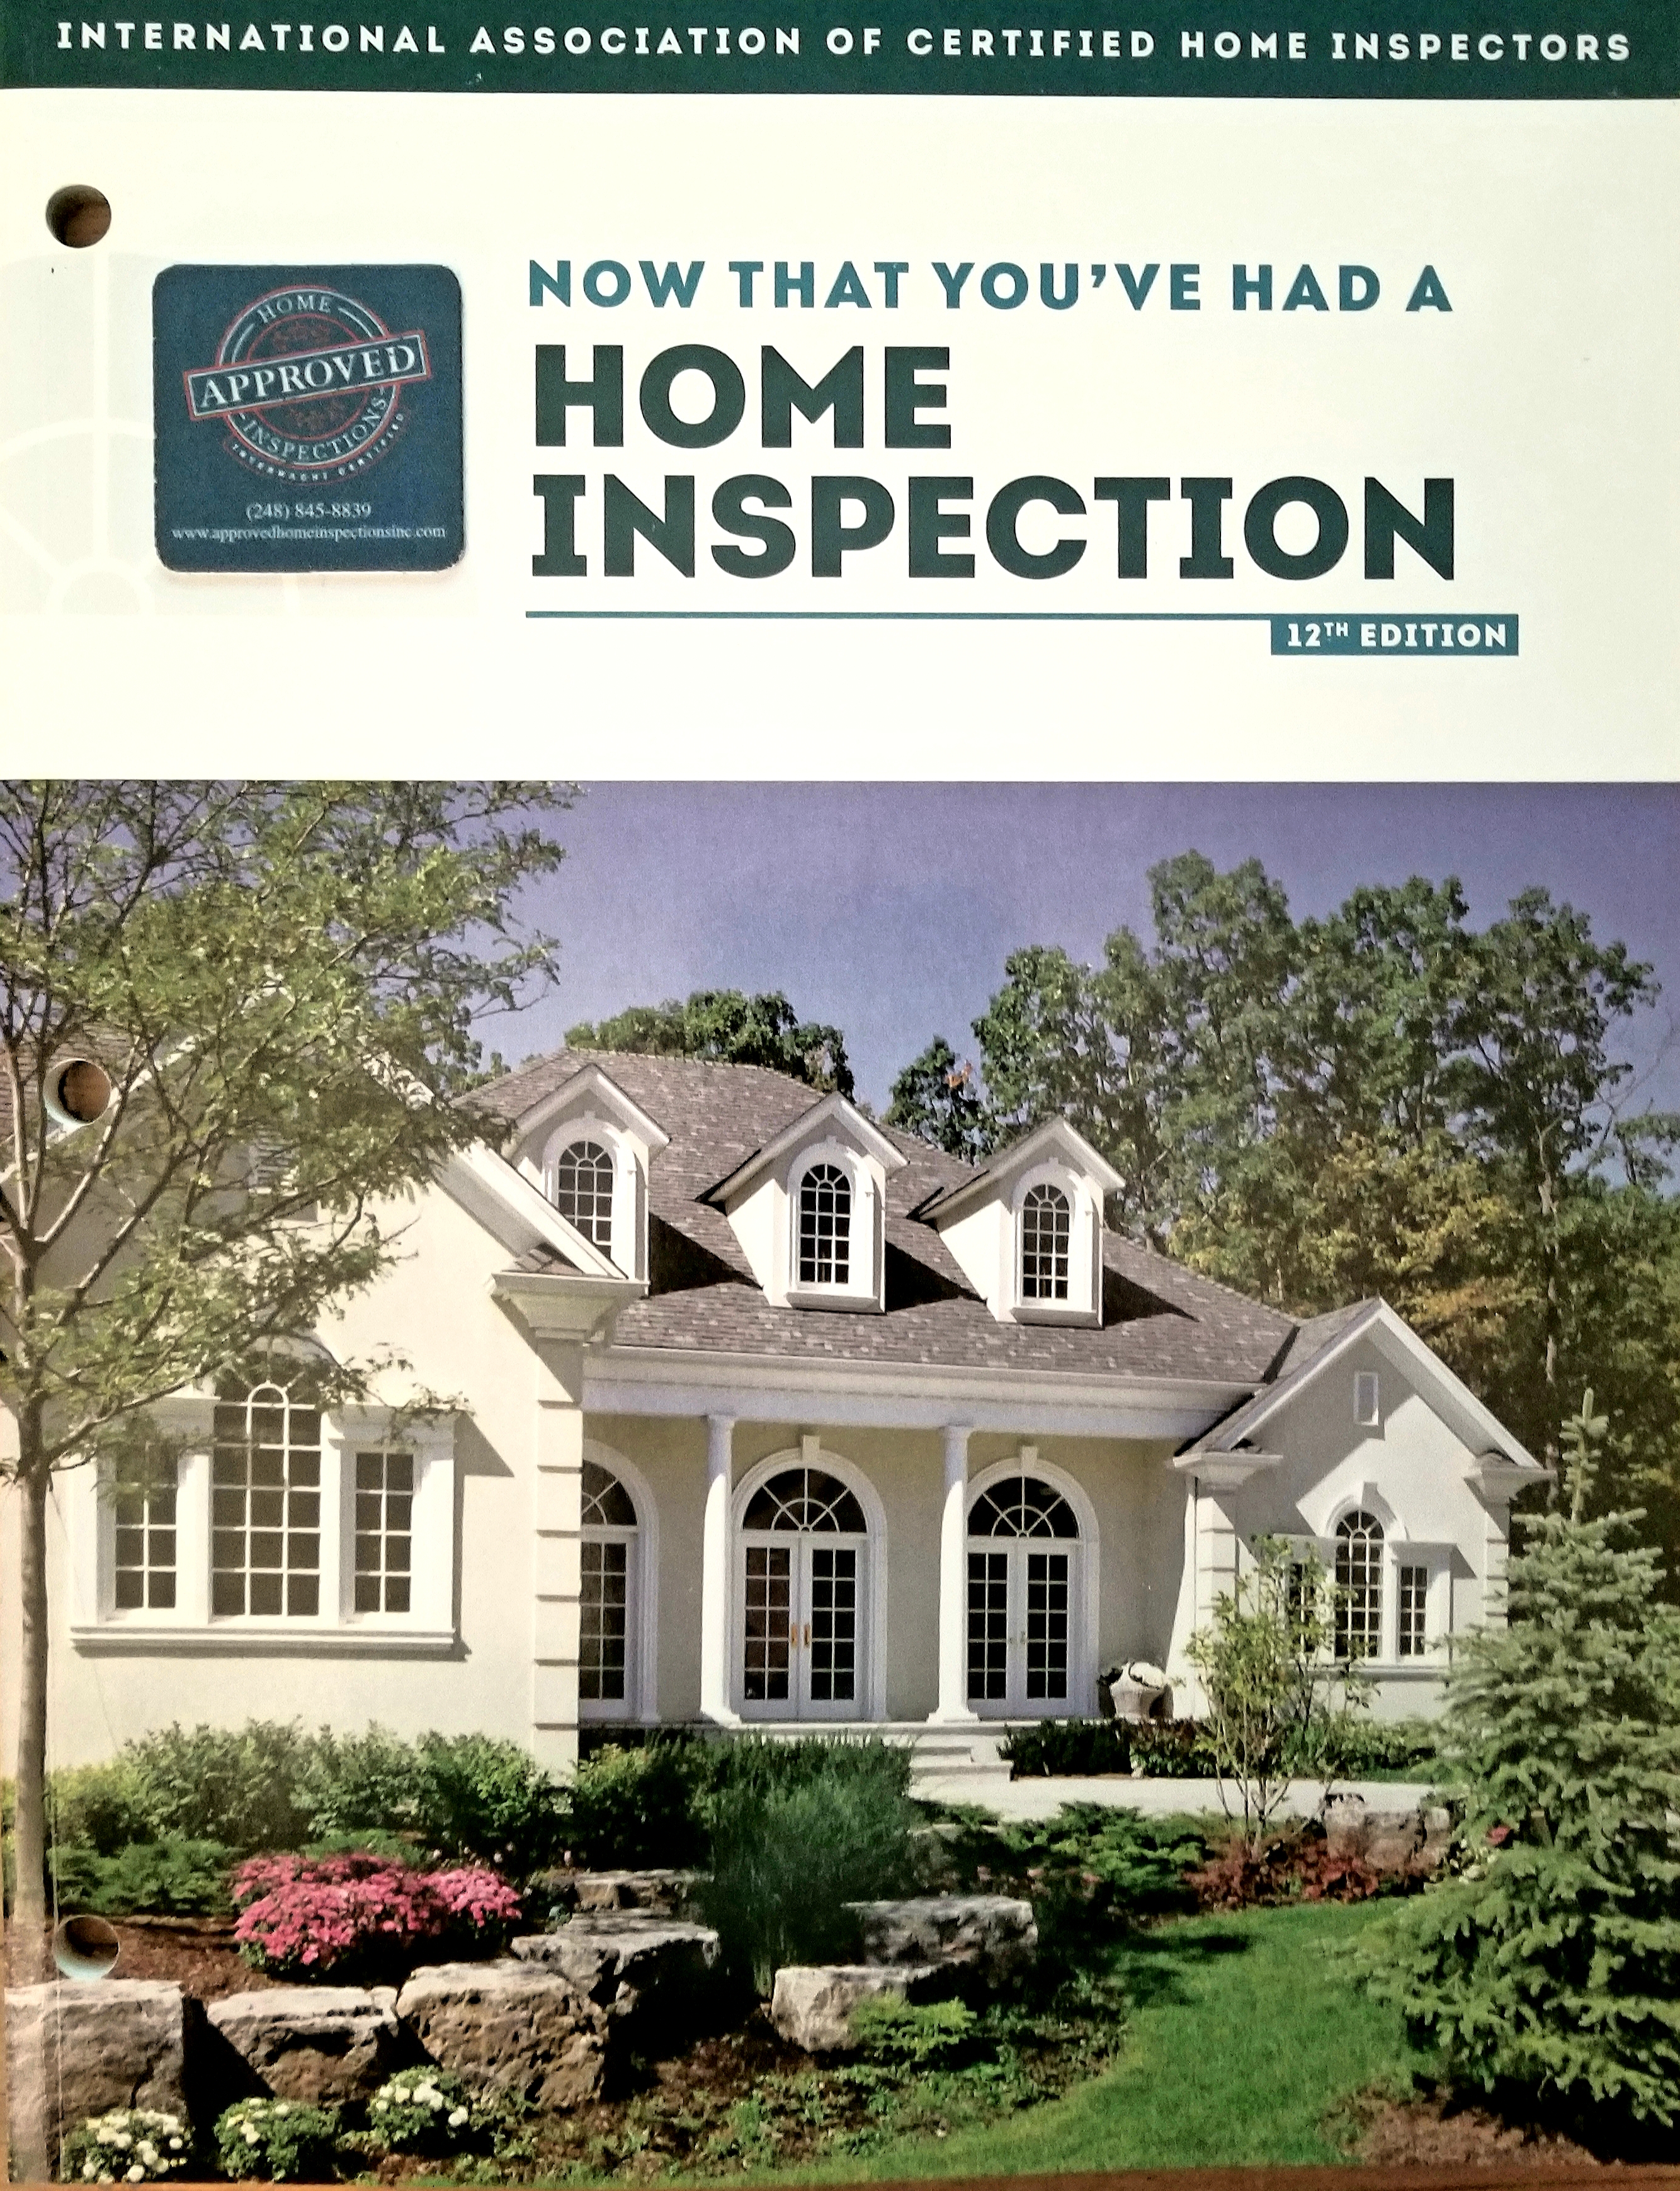 Now that you’ve had a home inspection